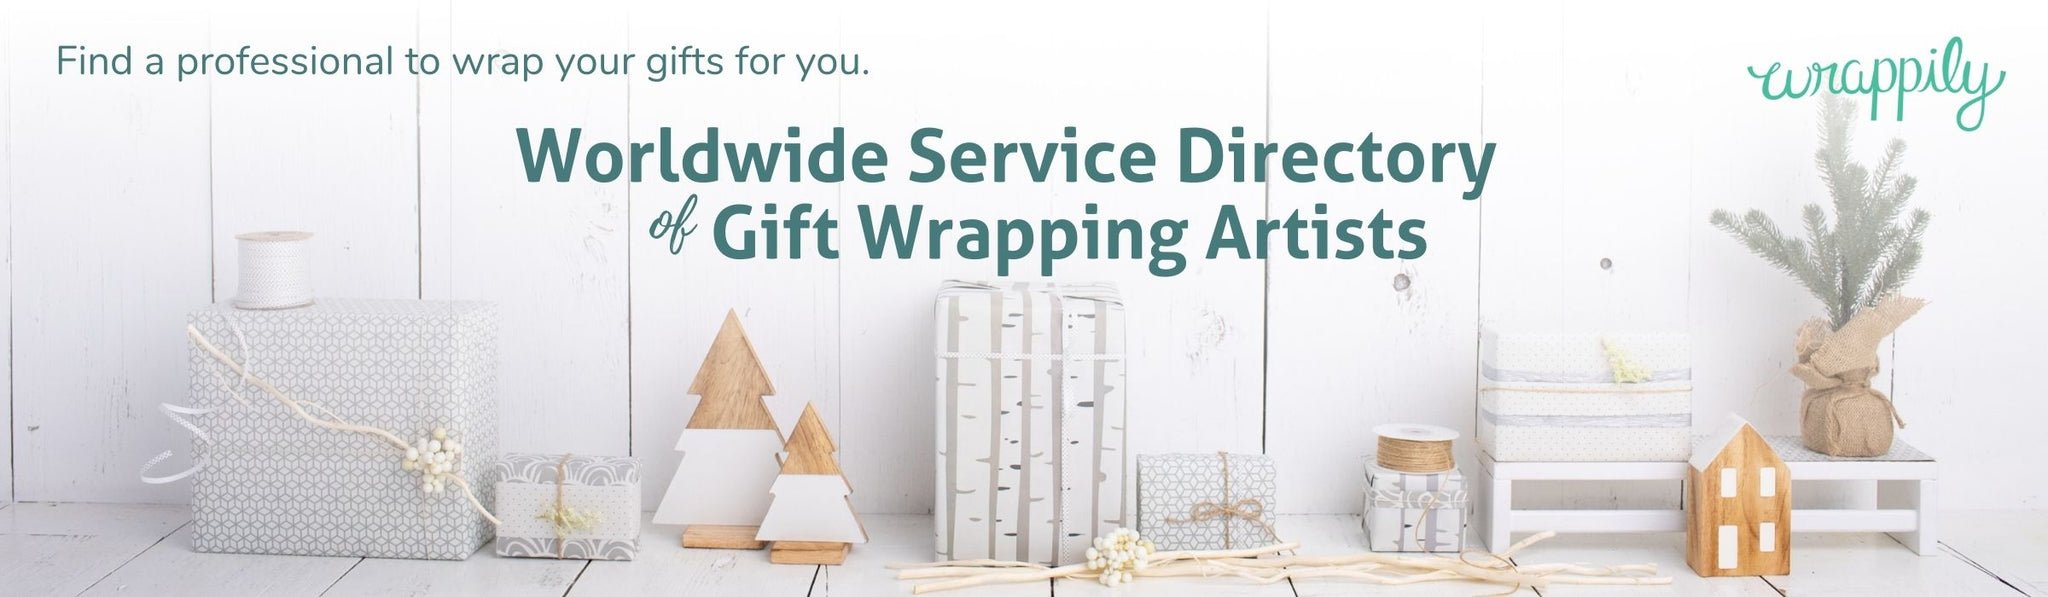 Find a professional to wrap gifts for you: Worldwide Service Directory of Gift Wrapping Artists